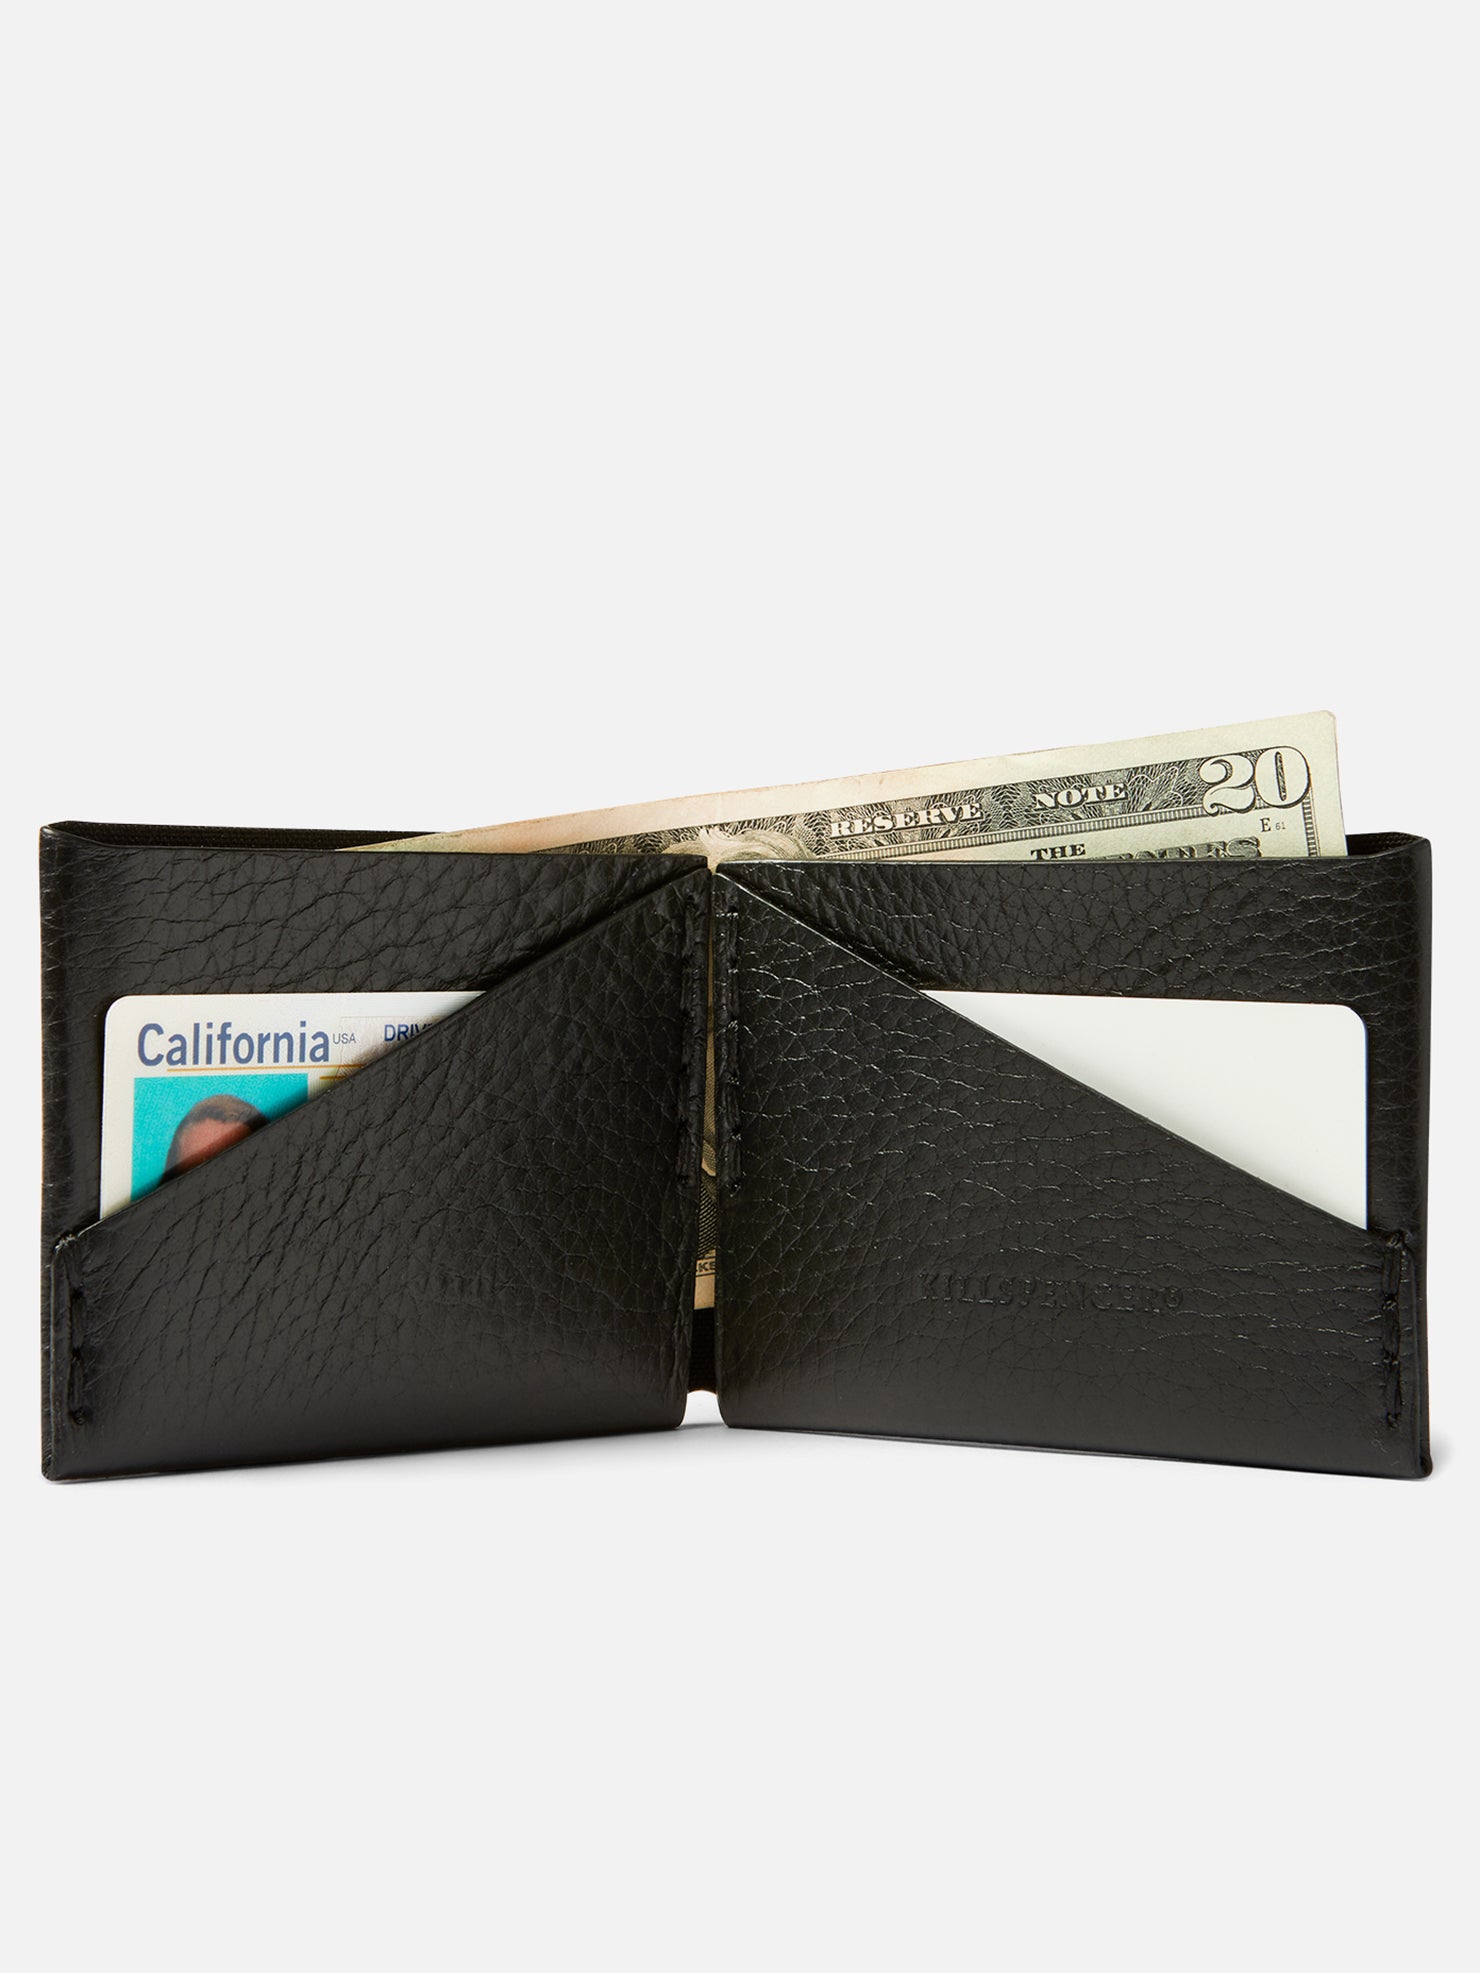 Louis Vuitton Wallets for sale in Los Angeles, California